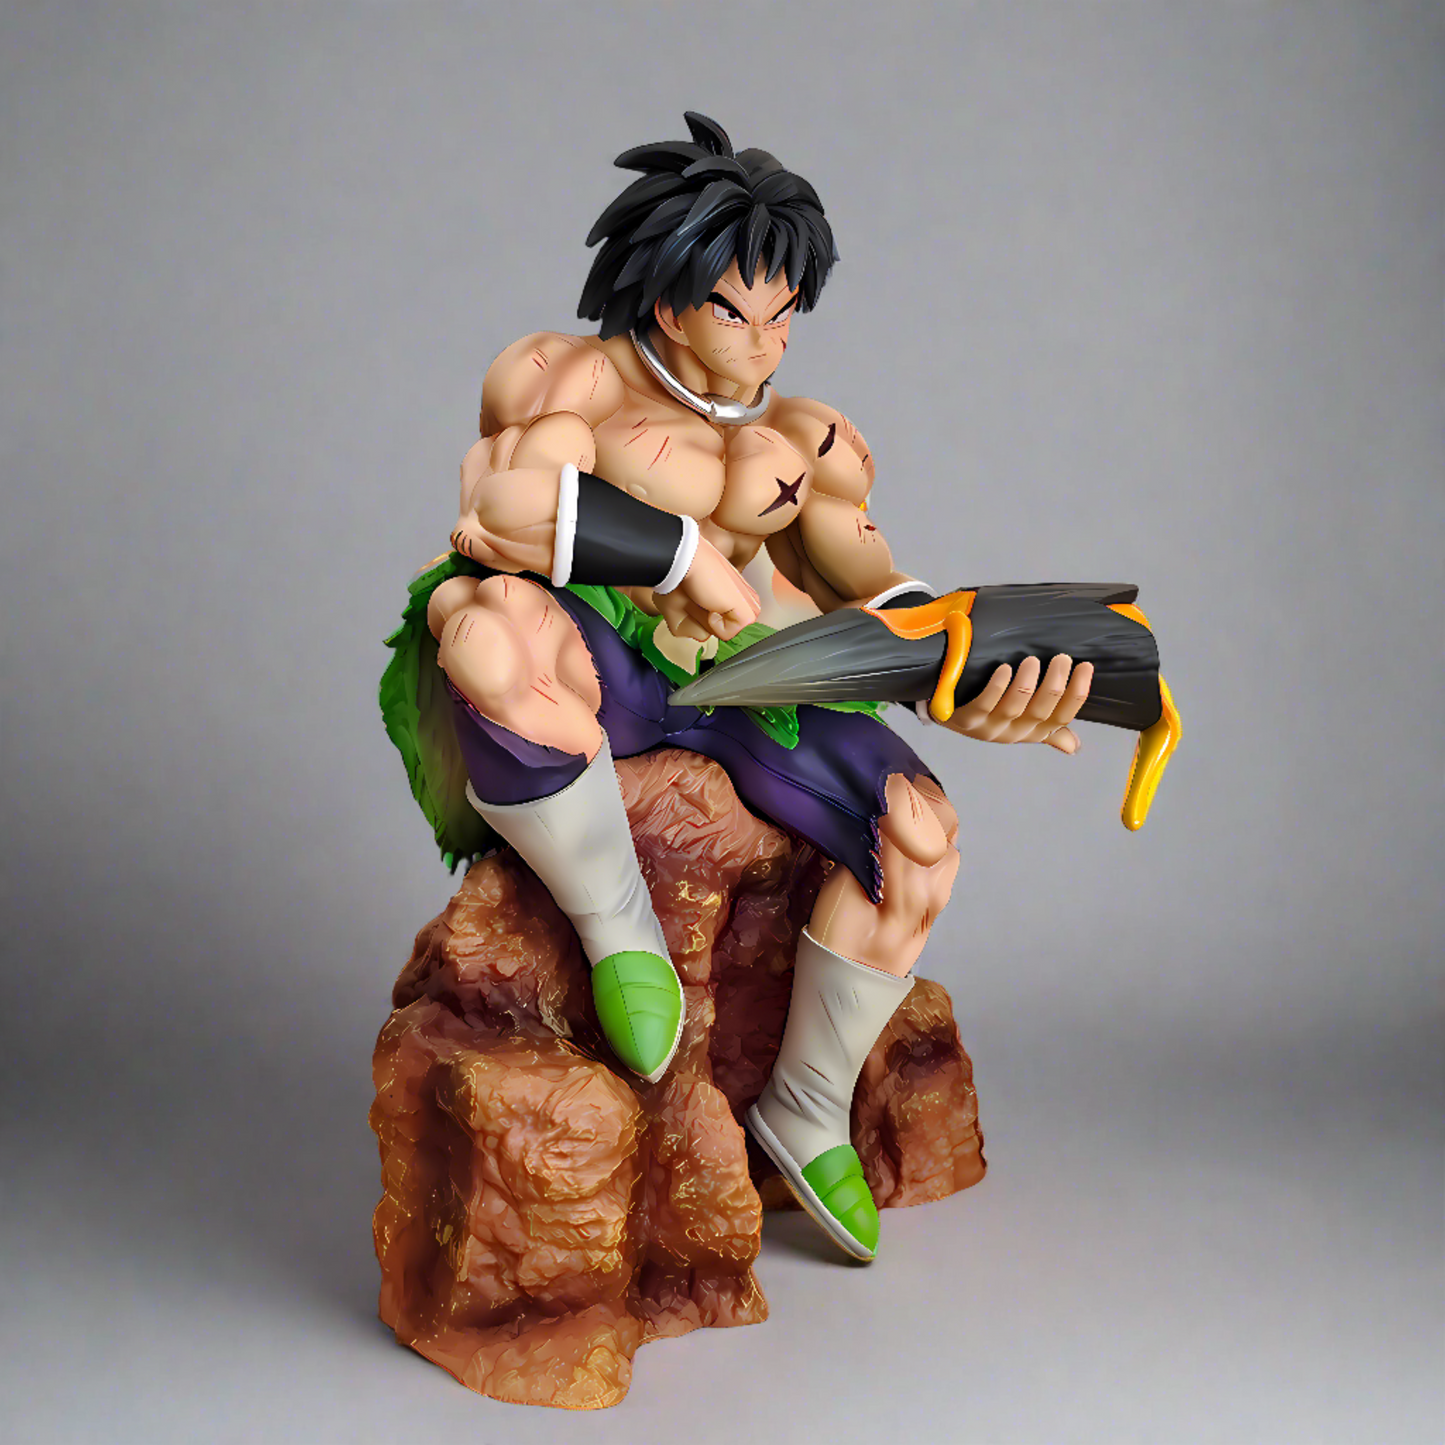 Collectible figure of Broly from Dragon Ball seated on a rock, reading a book amidst a fiery backdrop, showcasing his muscular physique and focused expression.